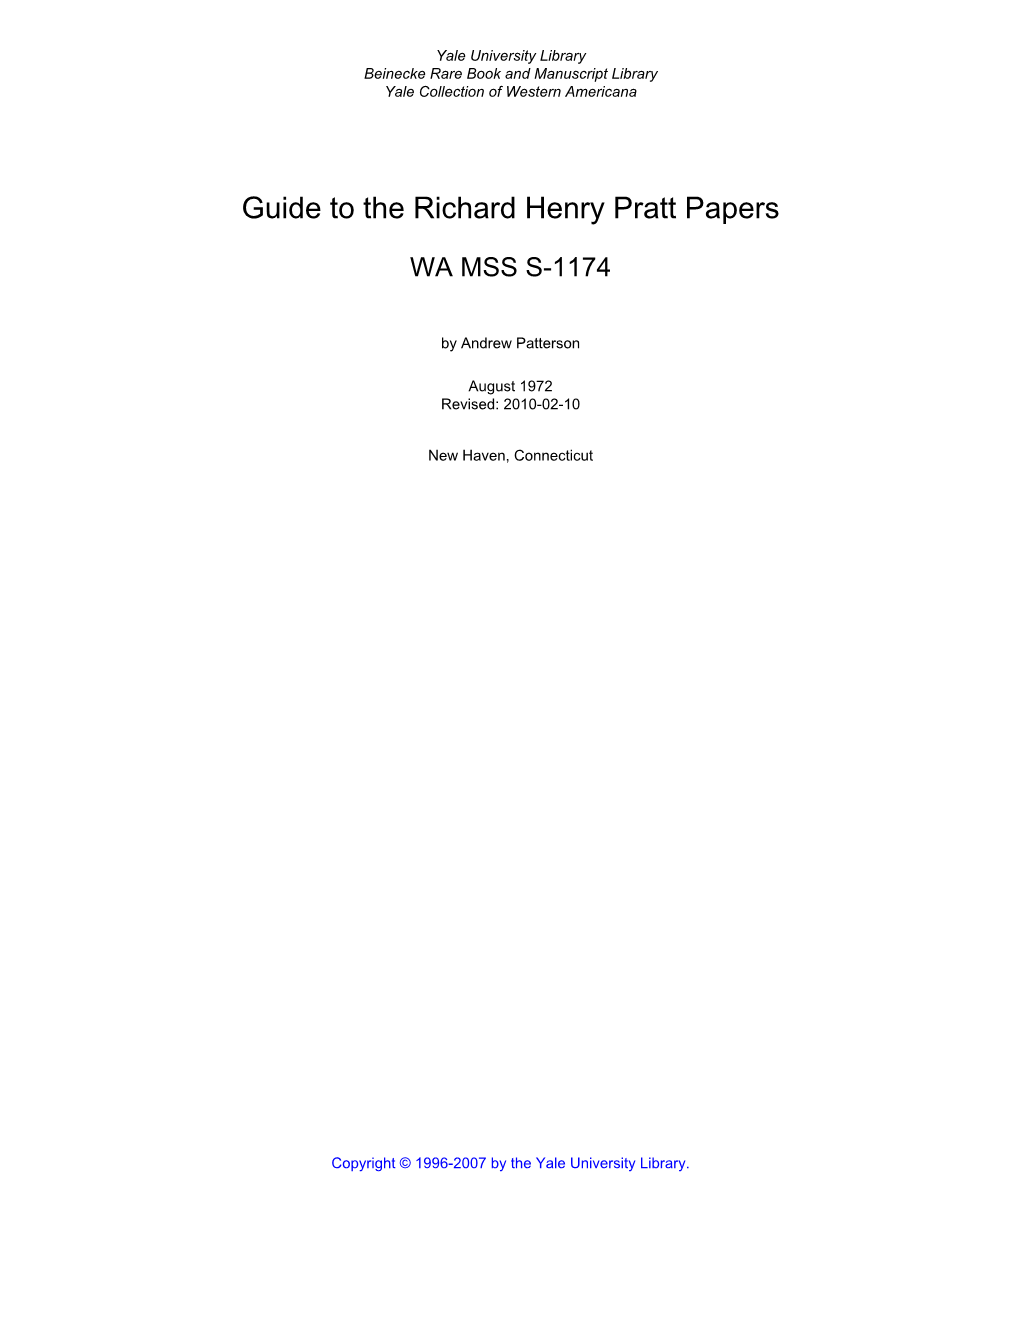 Guide to the Richard Henry Pratt Papers